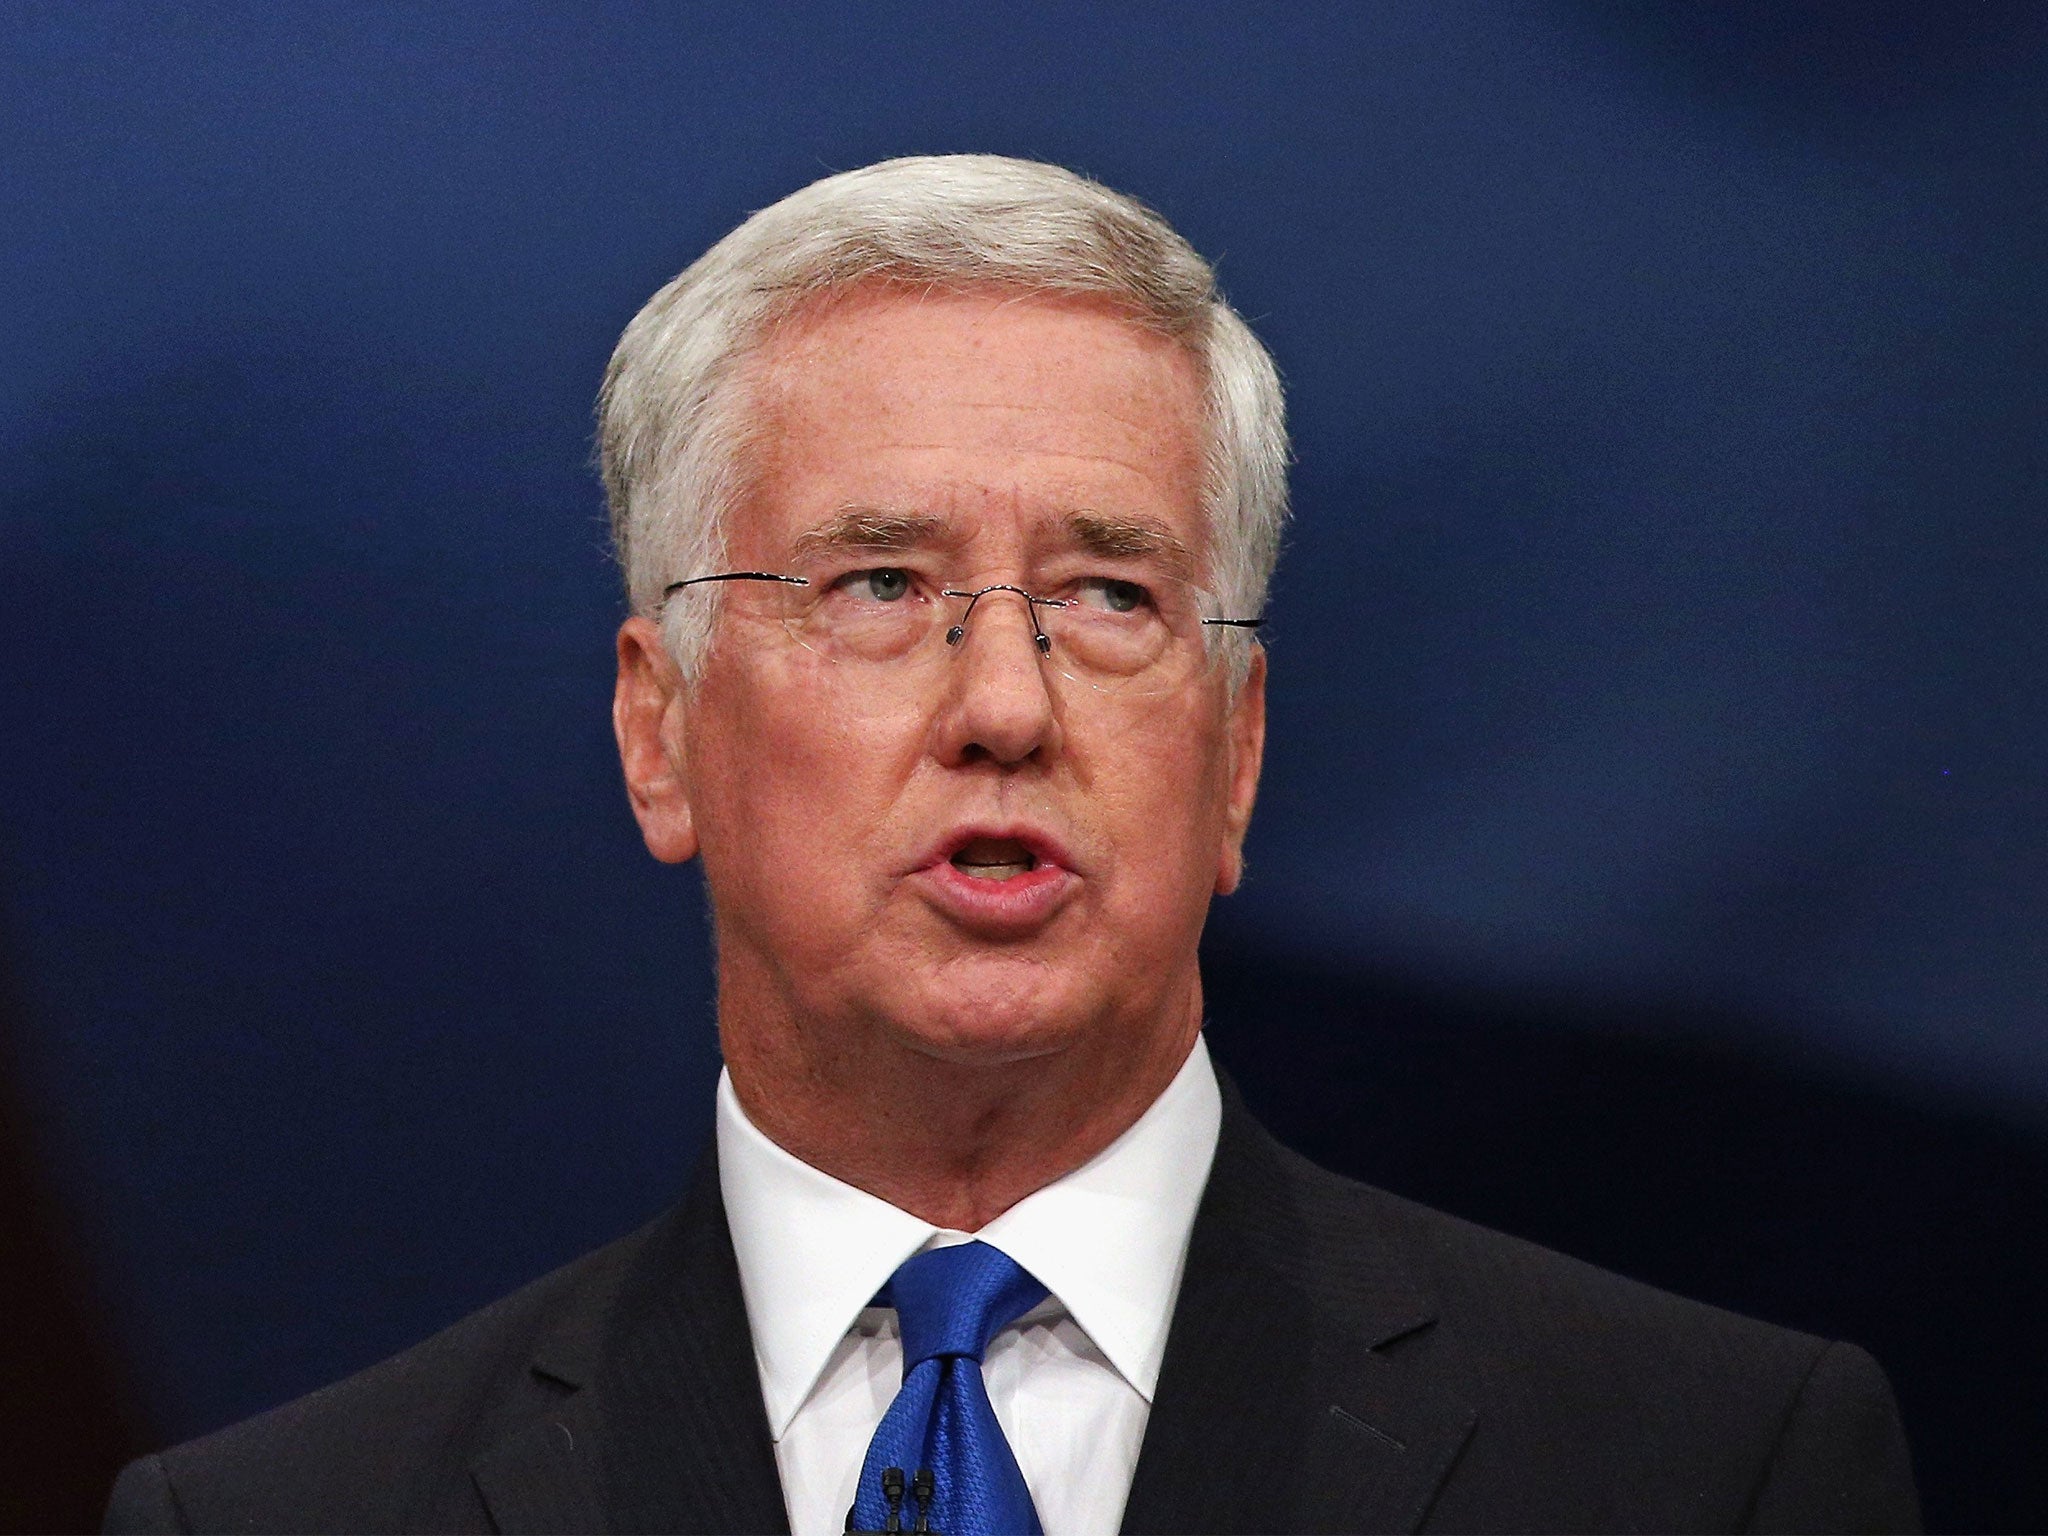 Michael Fallon says Russian intervention has made a 'difficult situation much more dangerous'